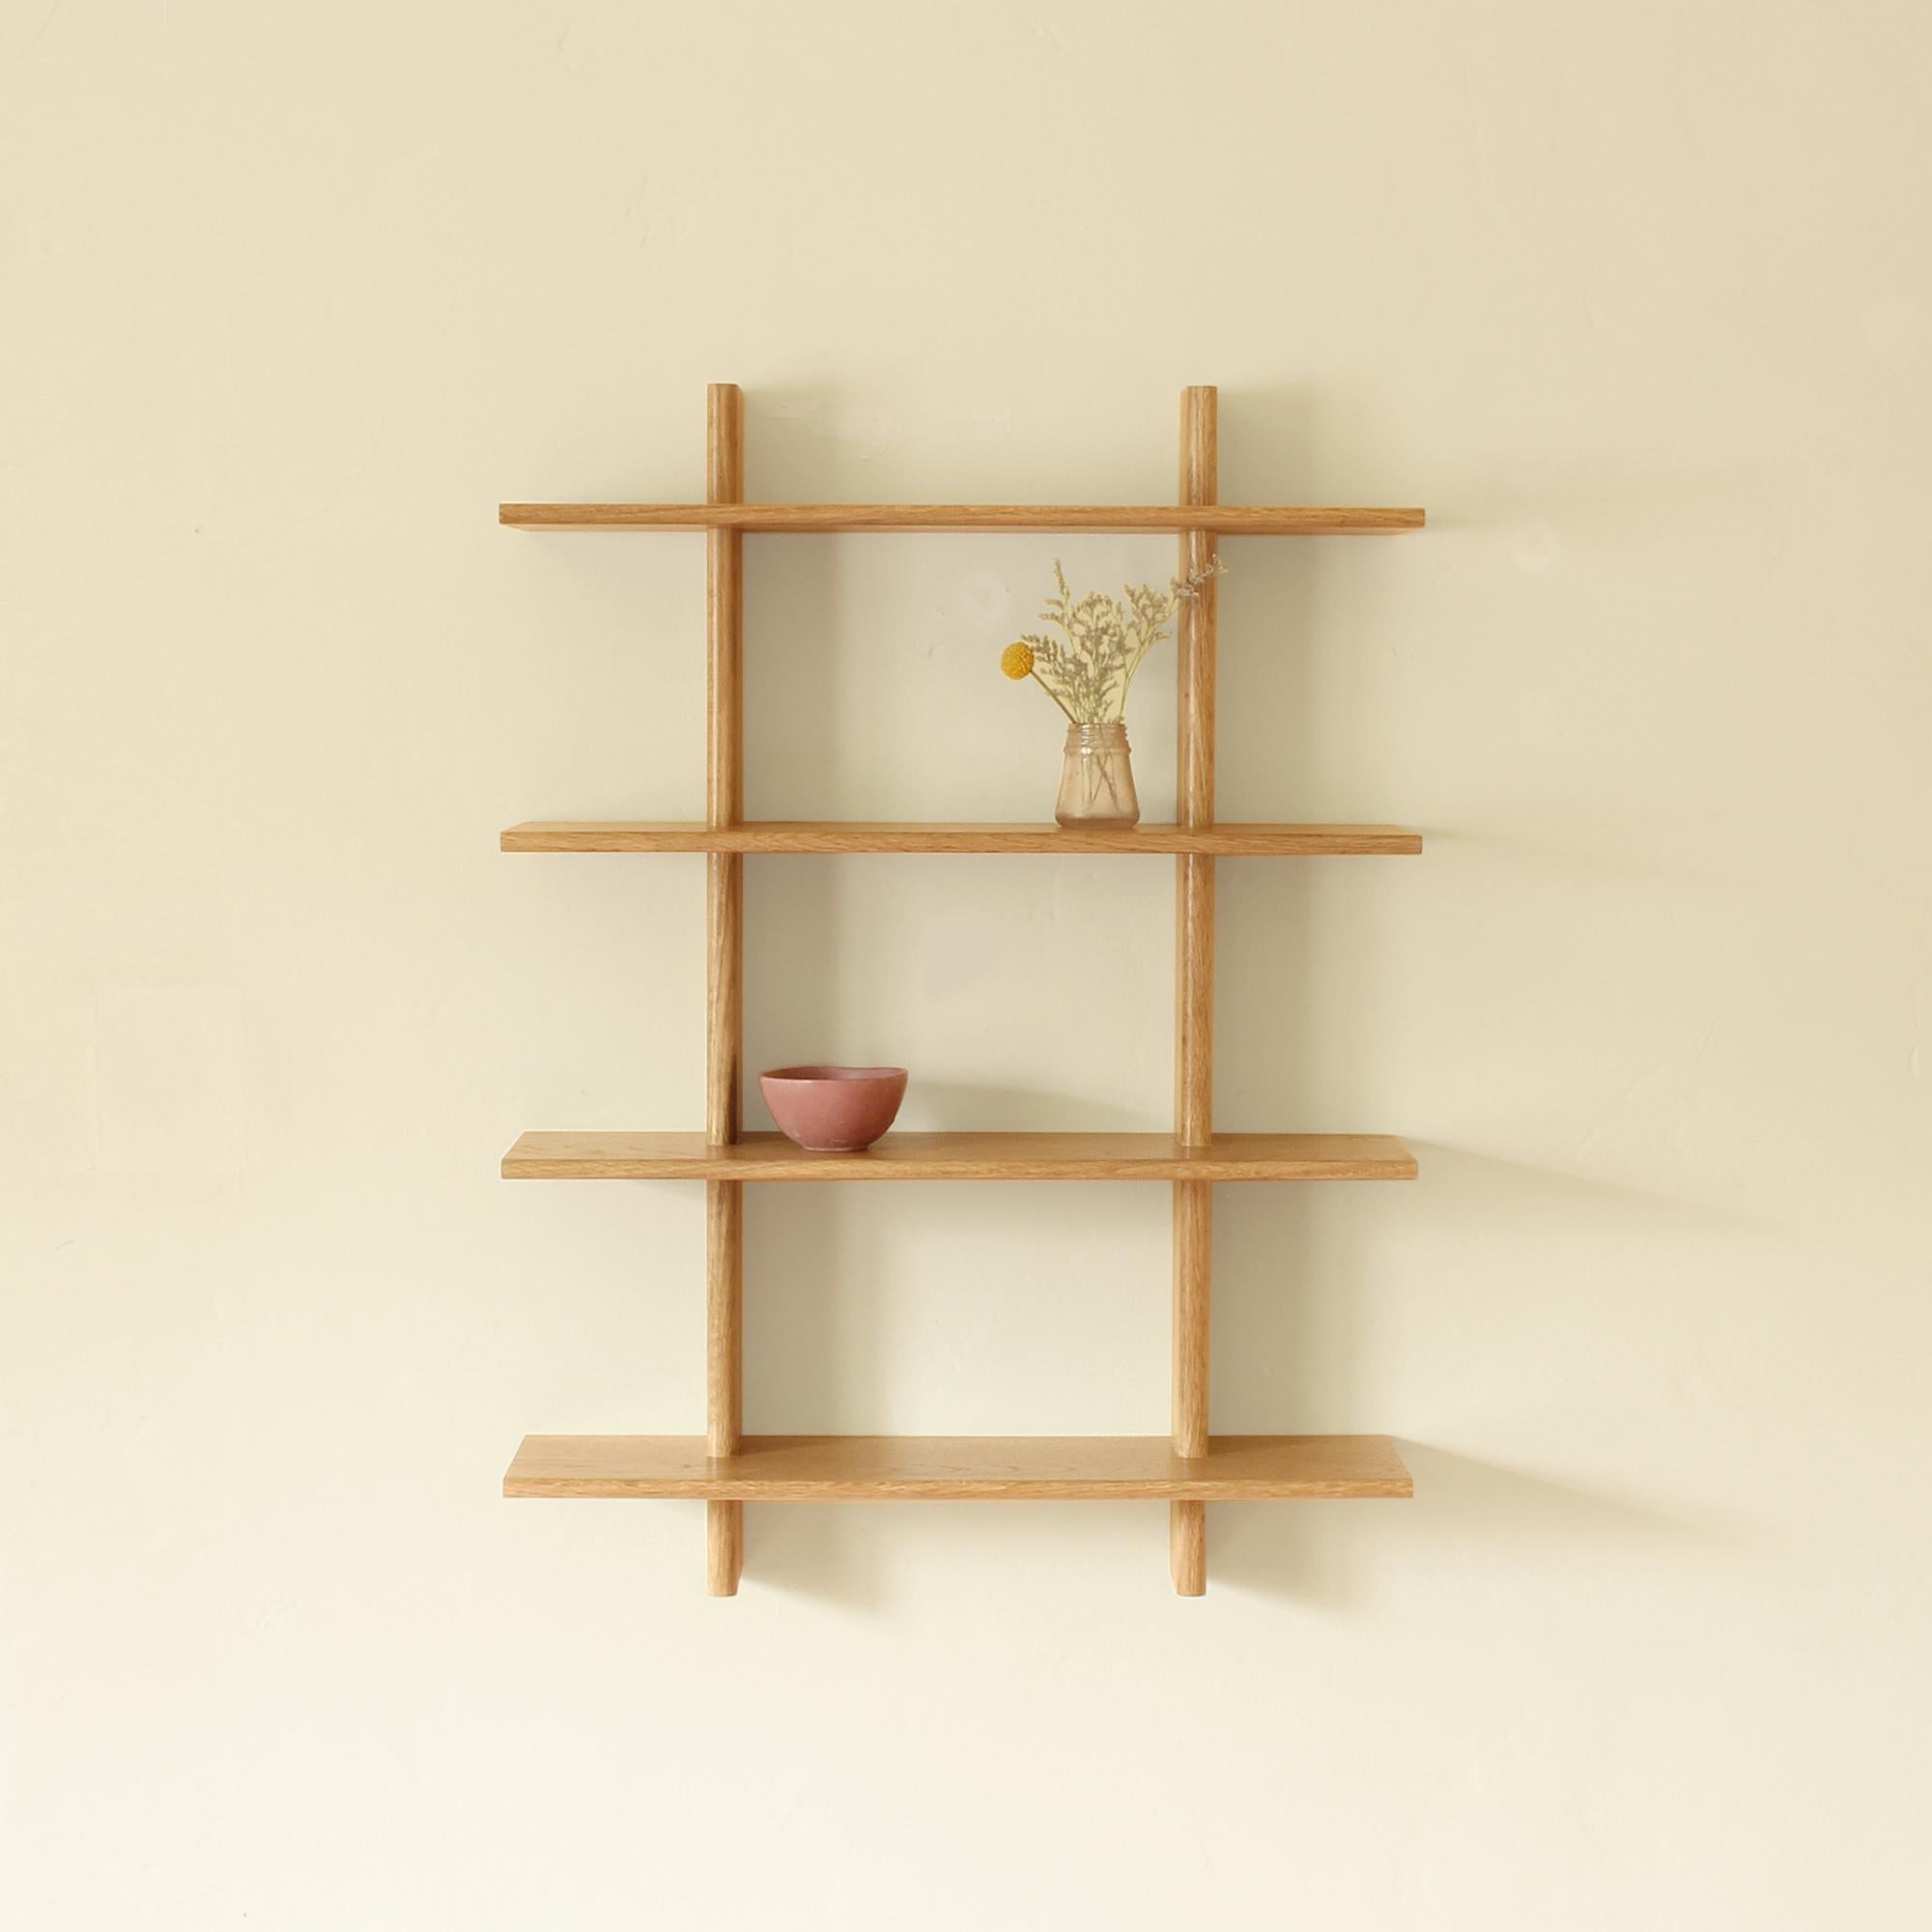 Solid white oak wall hanging shelves. Thin shelves and rounded faces add visual lightness. Meticulous precise joinery creates a sturdy surface. Hardware hidden behind shleves. This item is made to order by hand one at time. Currently turnaround time